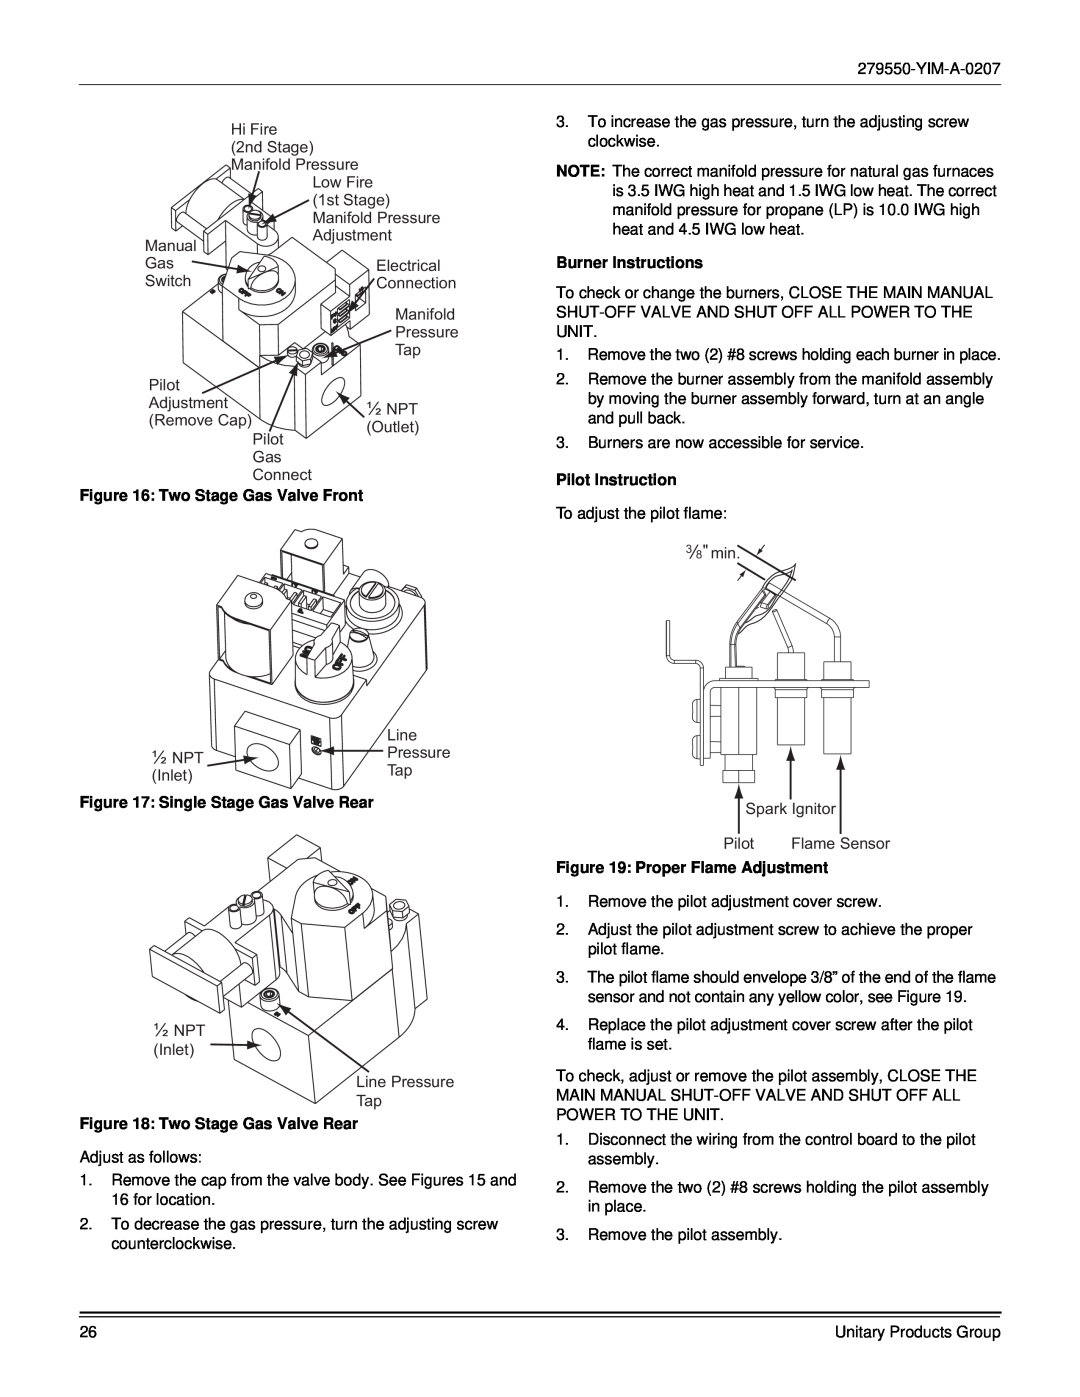 York R-410A dimensions Two Stage Gas Valve Front, Burner Instructions, Pilot Instruction, Single Stage Gas Valve Rear 